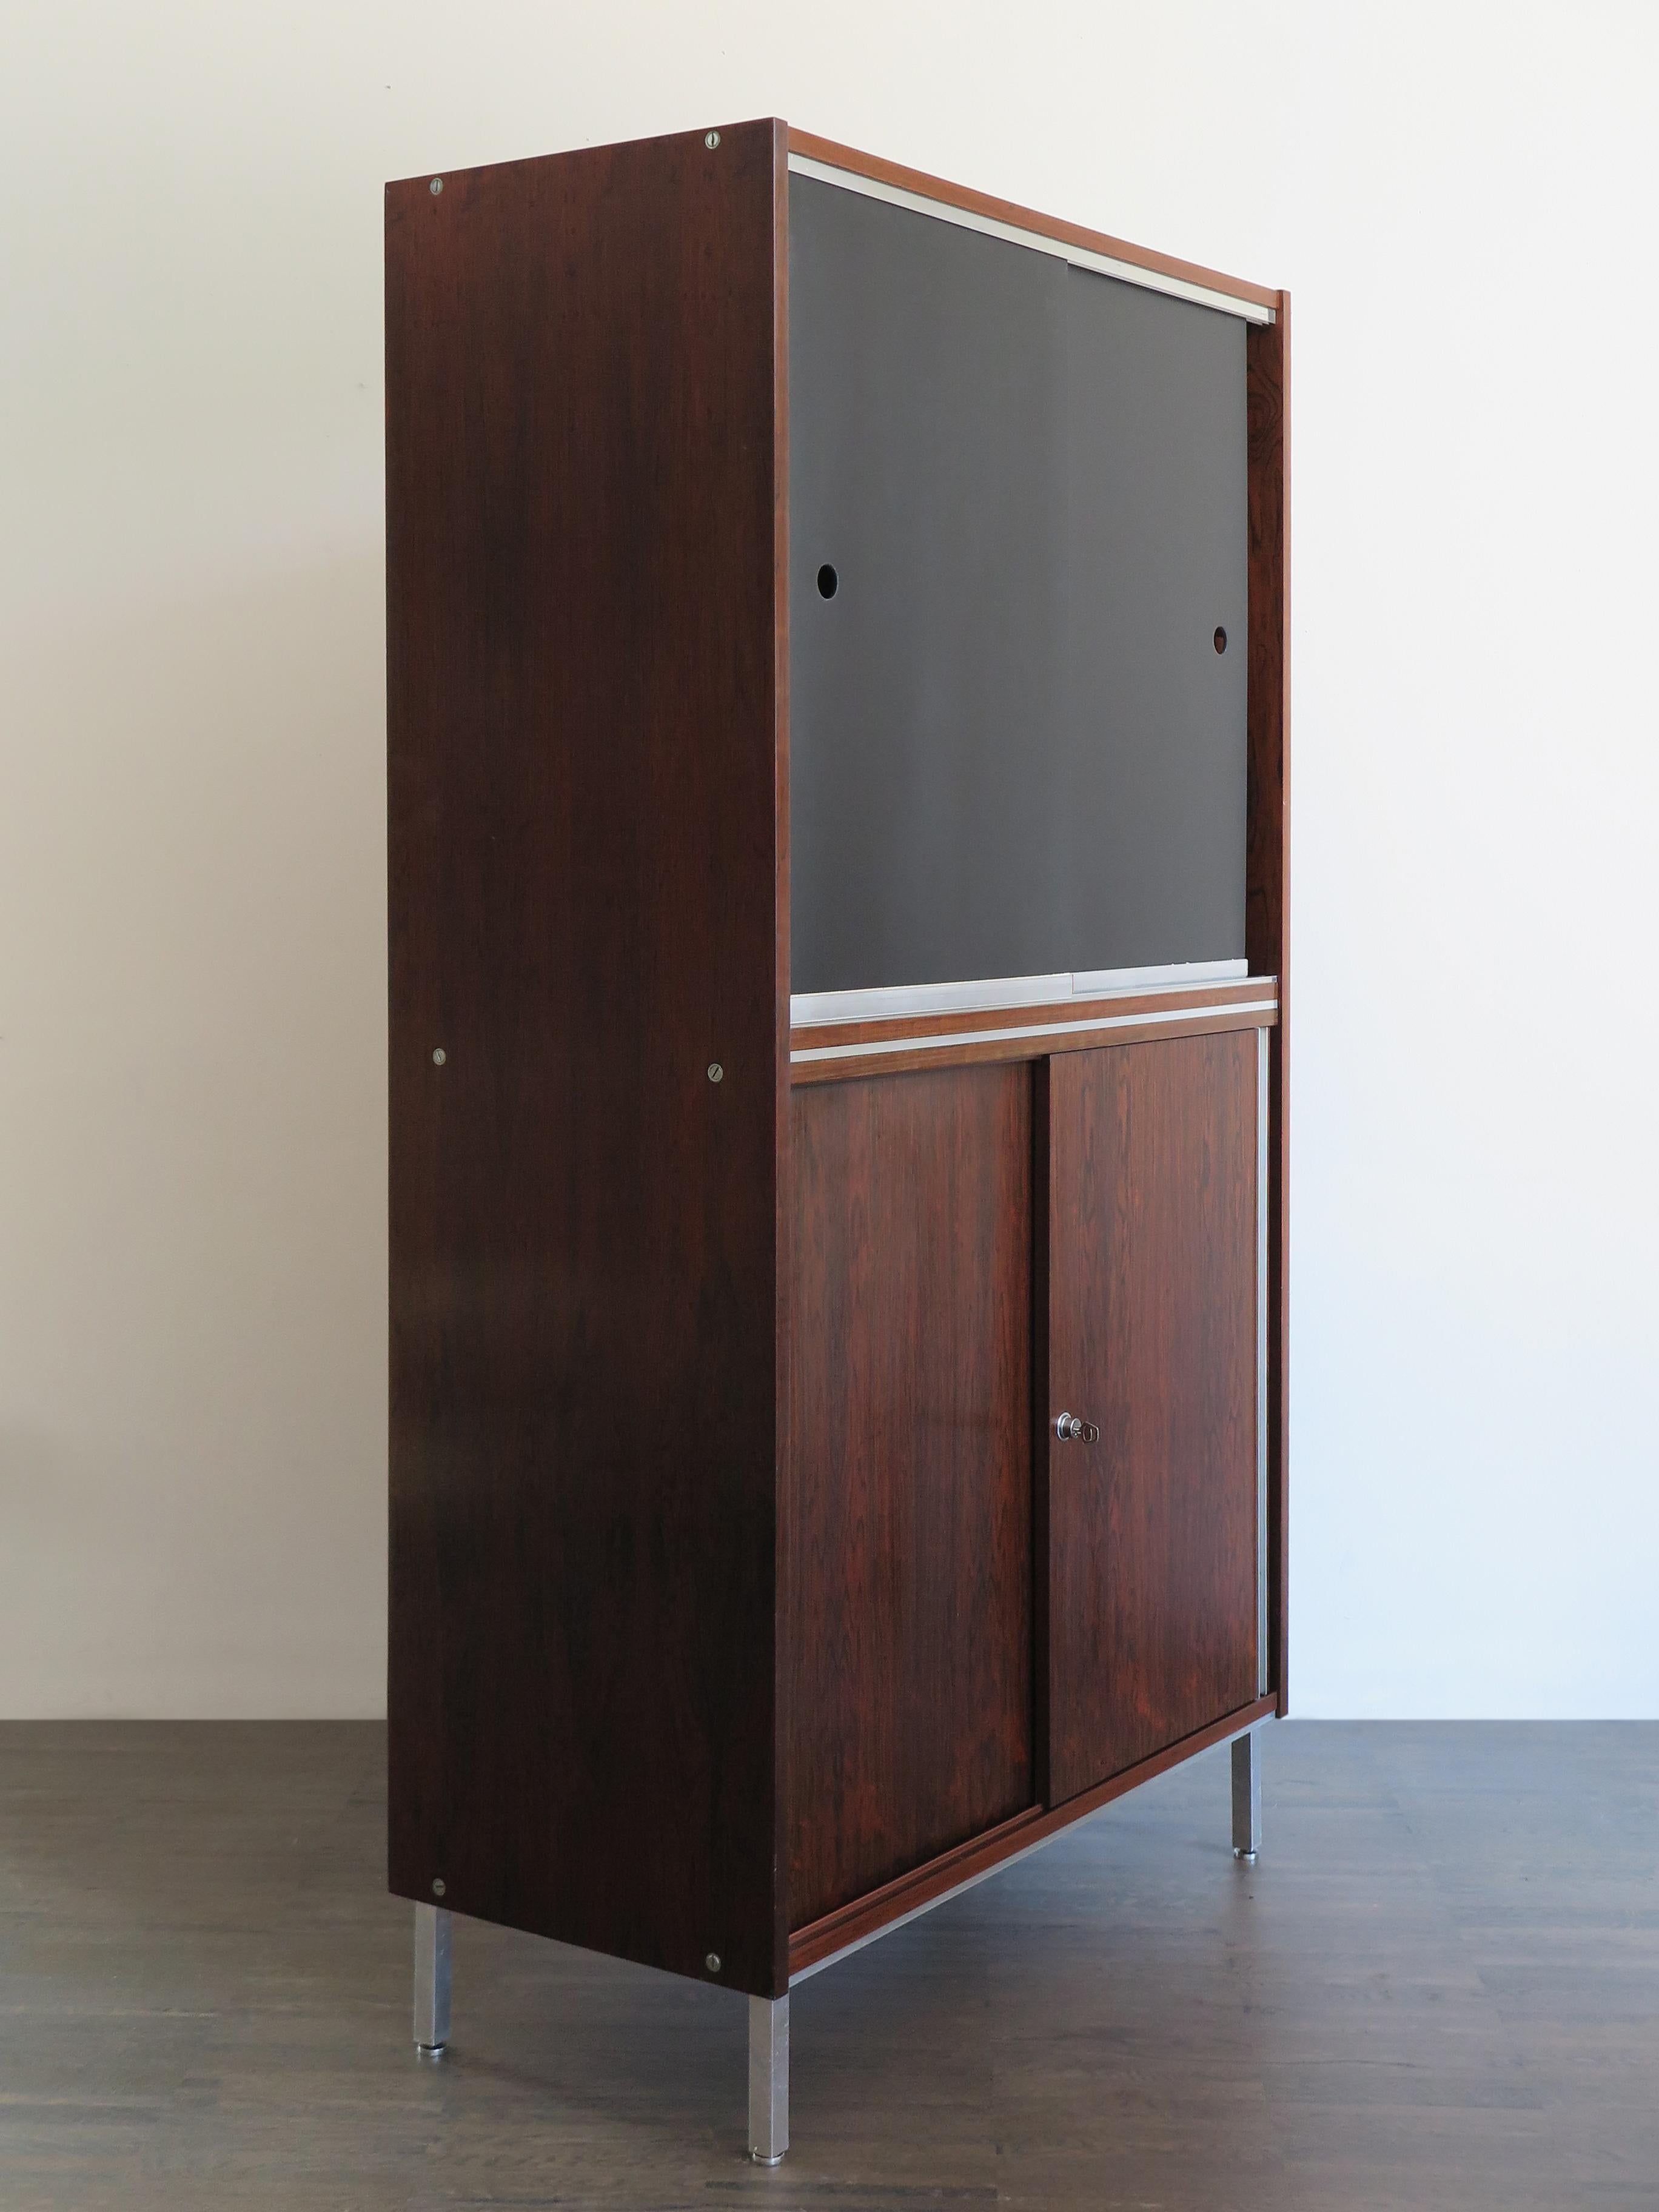 1960s dark wood cabinet / office cabinet designed by George Nelson
with metal and aluminum detail and original key, new black sliding doors, midcentury design. 
Some signs due to normal use over time.